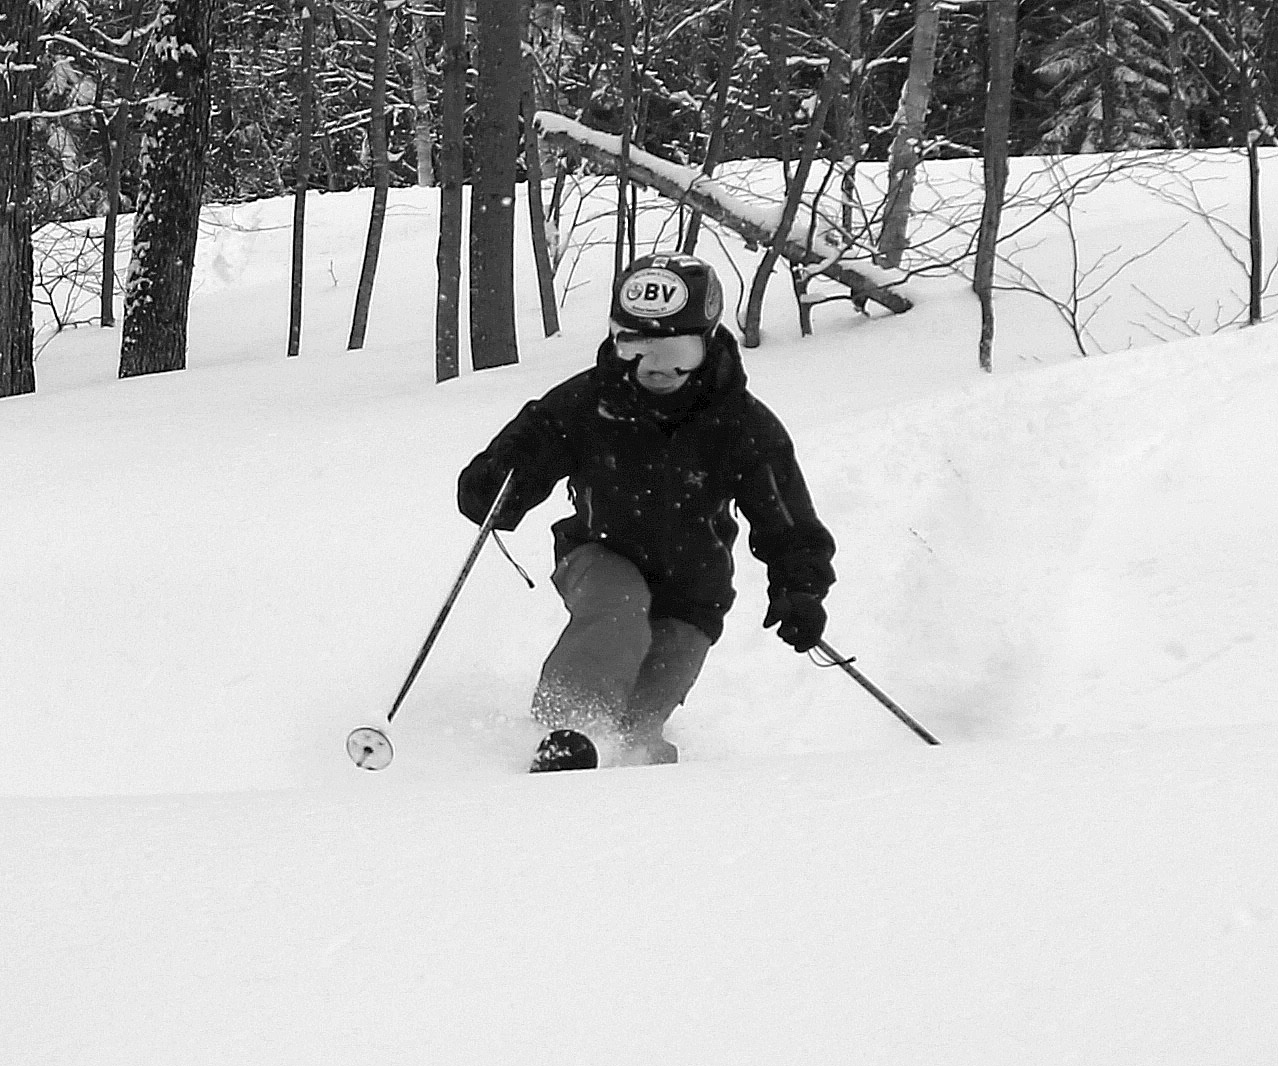 A black and white image of Ty Telemark skiing in powder after Winter Storm Quest in the Snowflake area of Bolton Valley Resort in Vermont